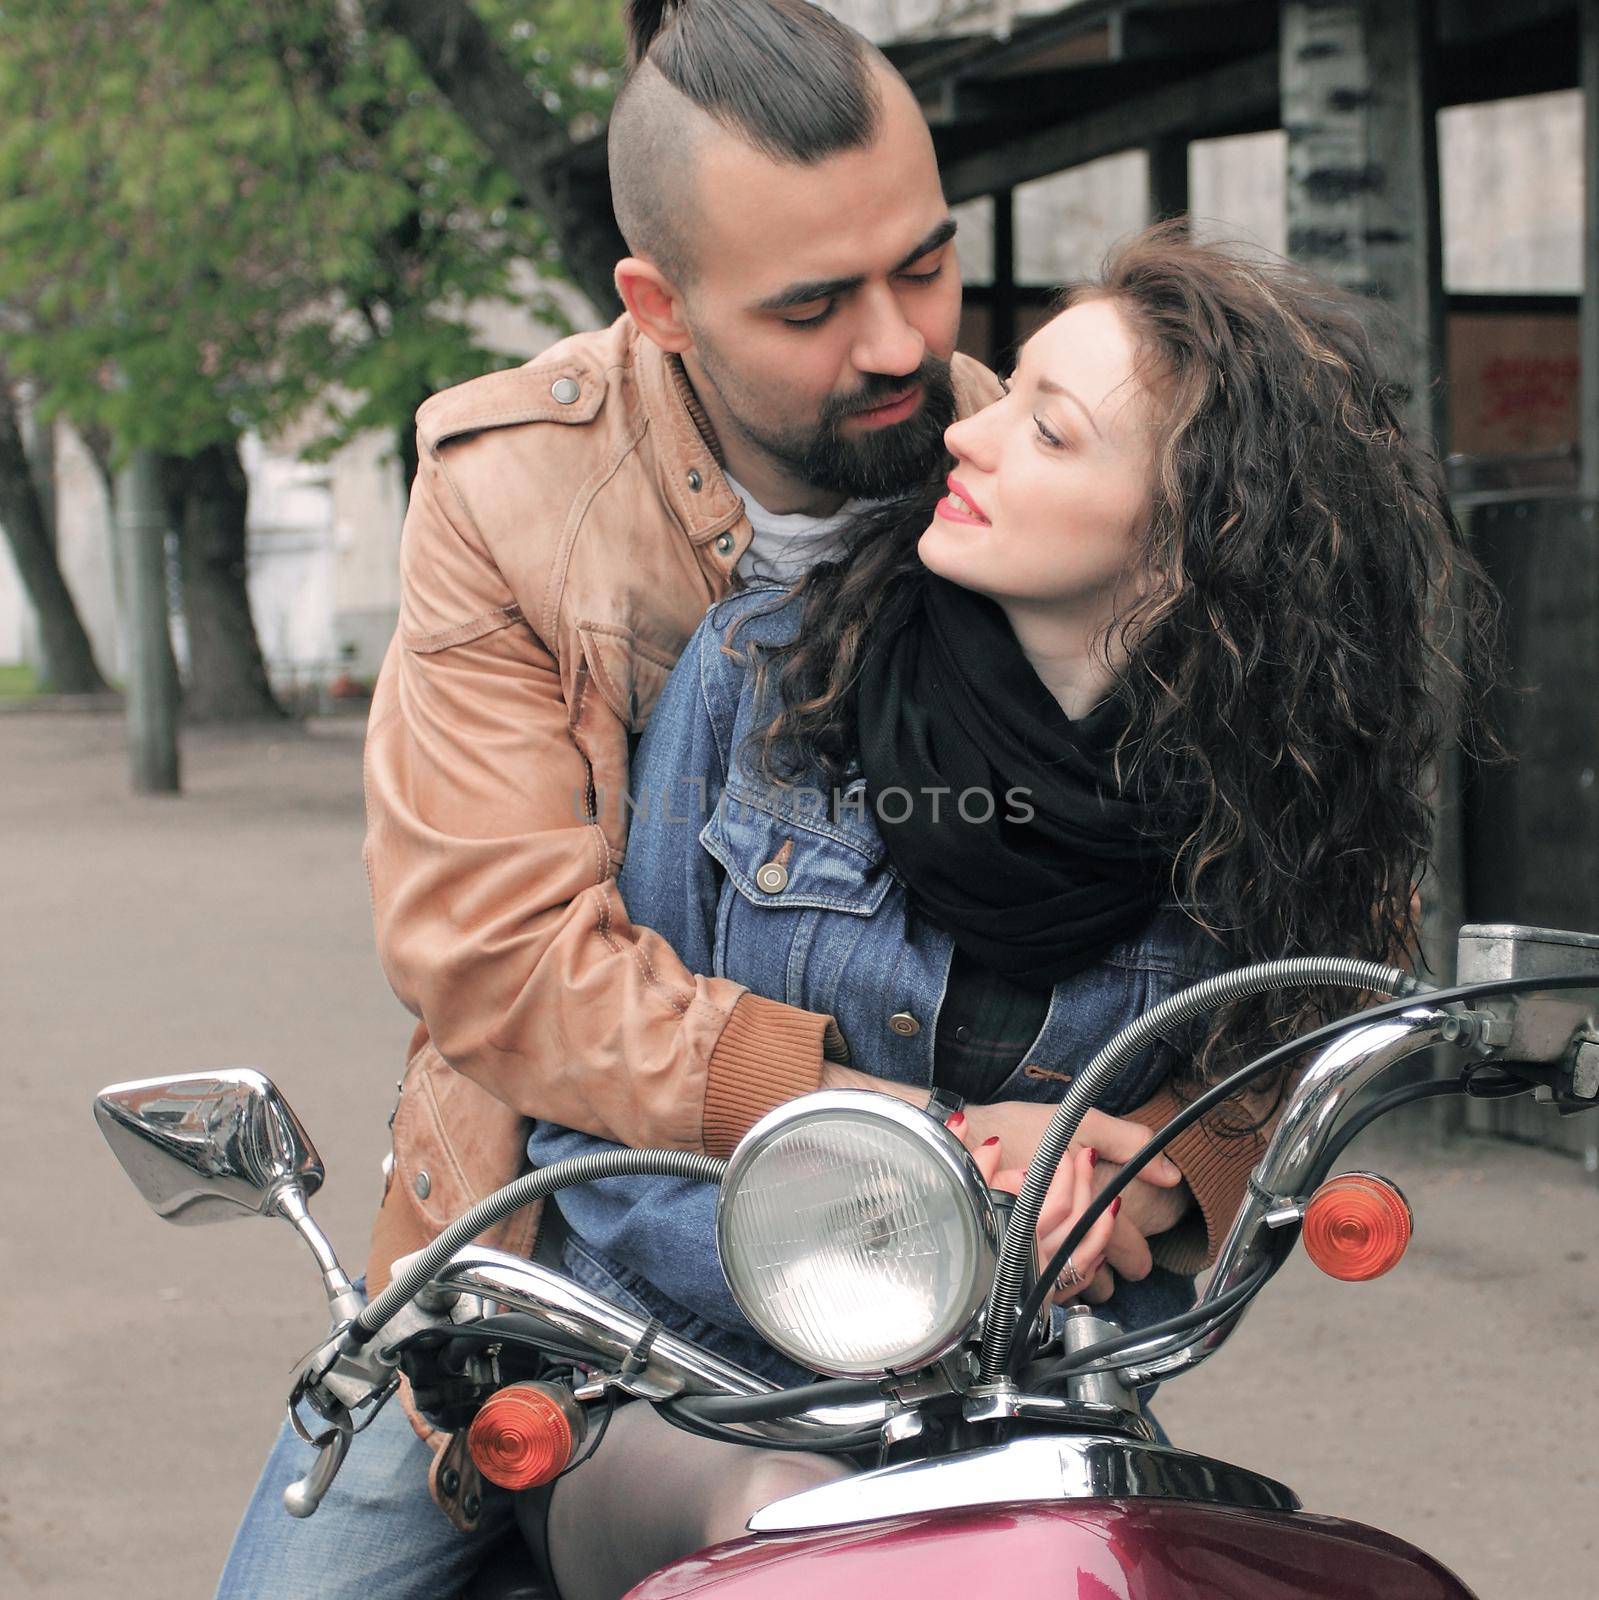 happy loving couple riding a motorcycle . love story